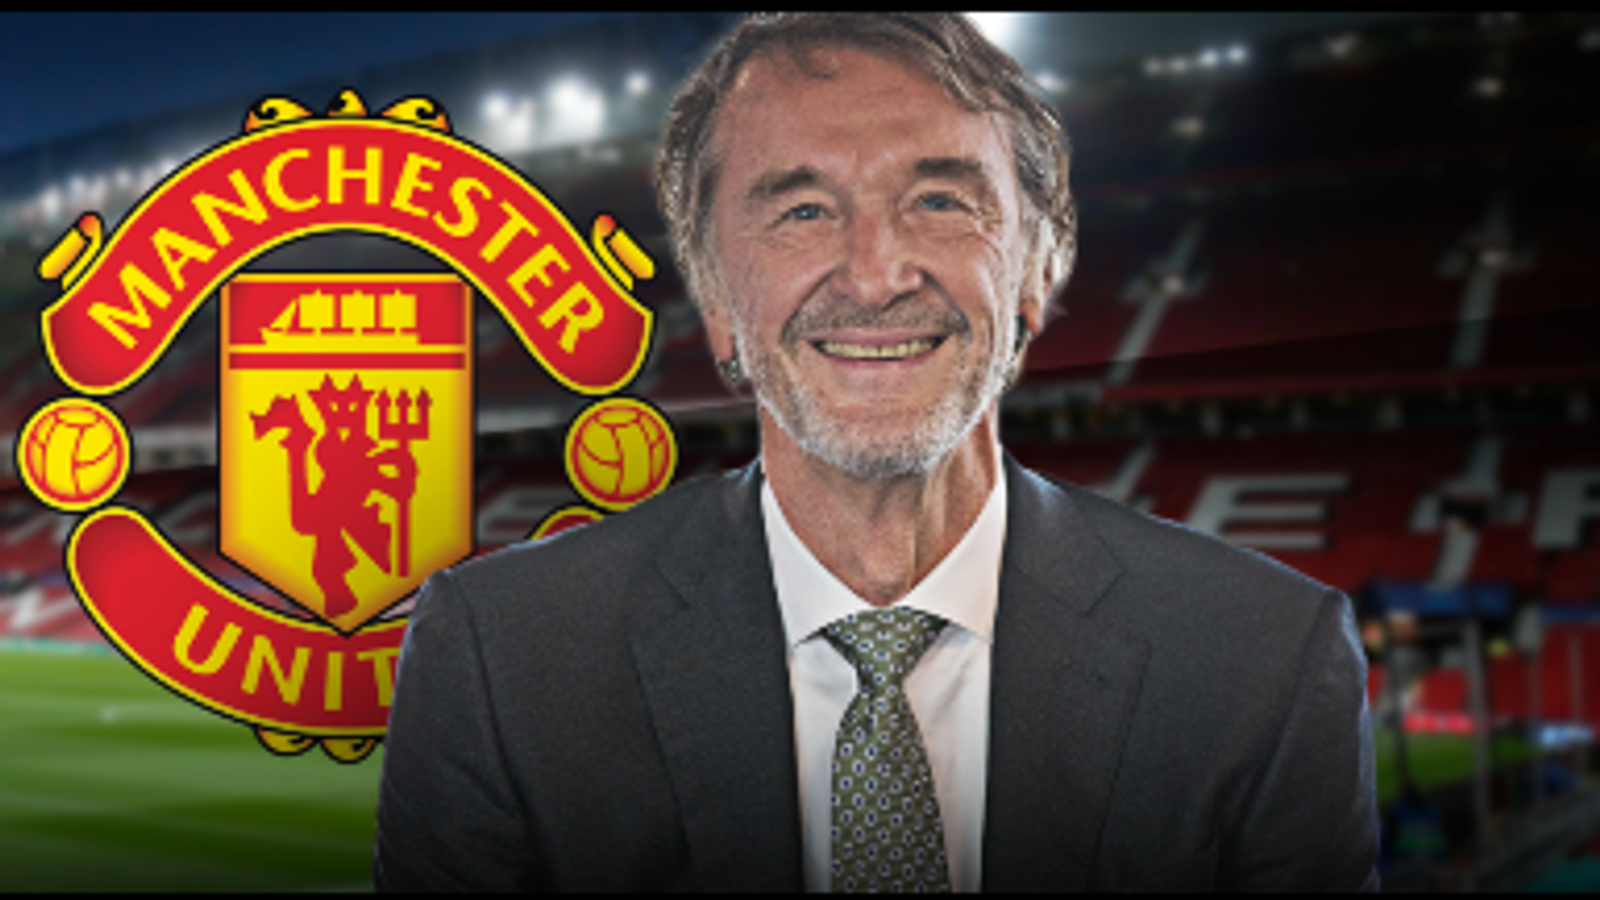 Manchester United takeover: Sir Jim Ratcliffe officially enters bidding to buy Premier League club | Football News | Sky Sports